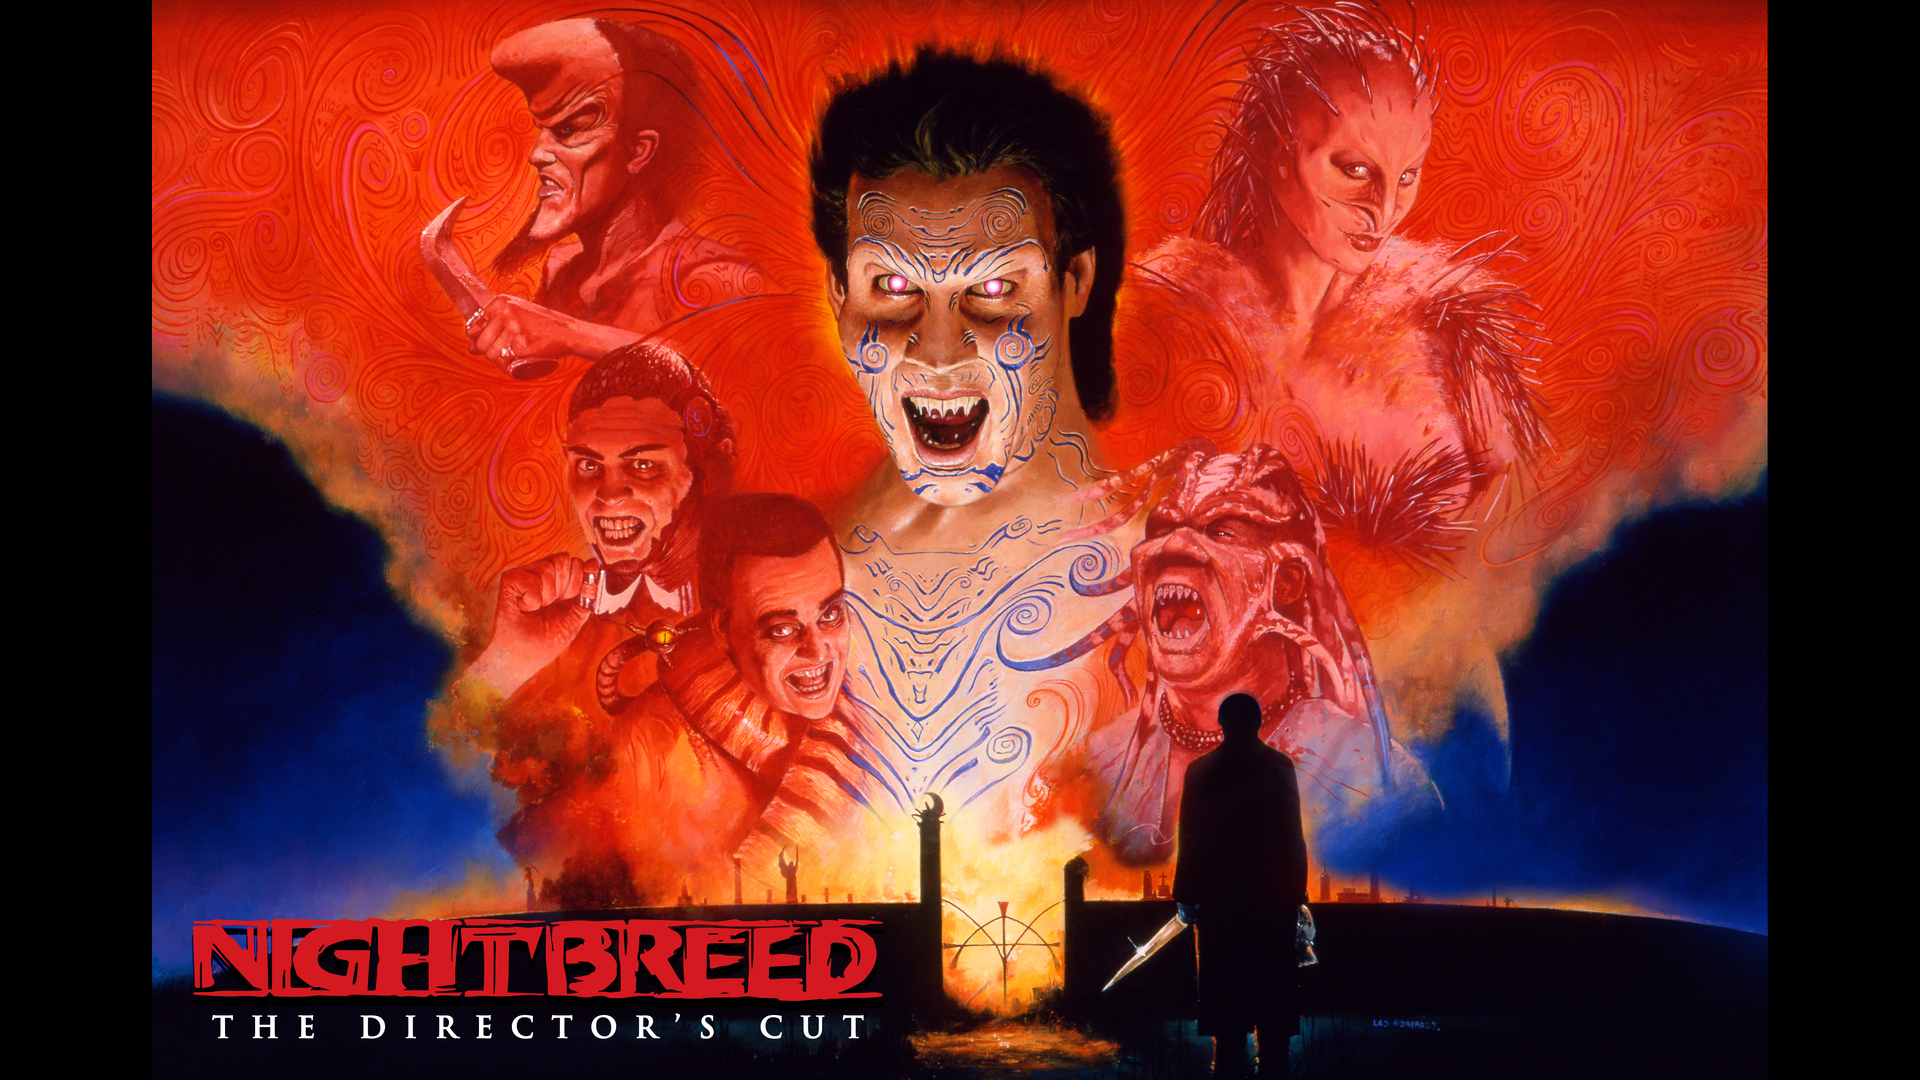 45-facts-about-the-movie-nightbreed